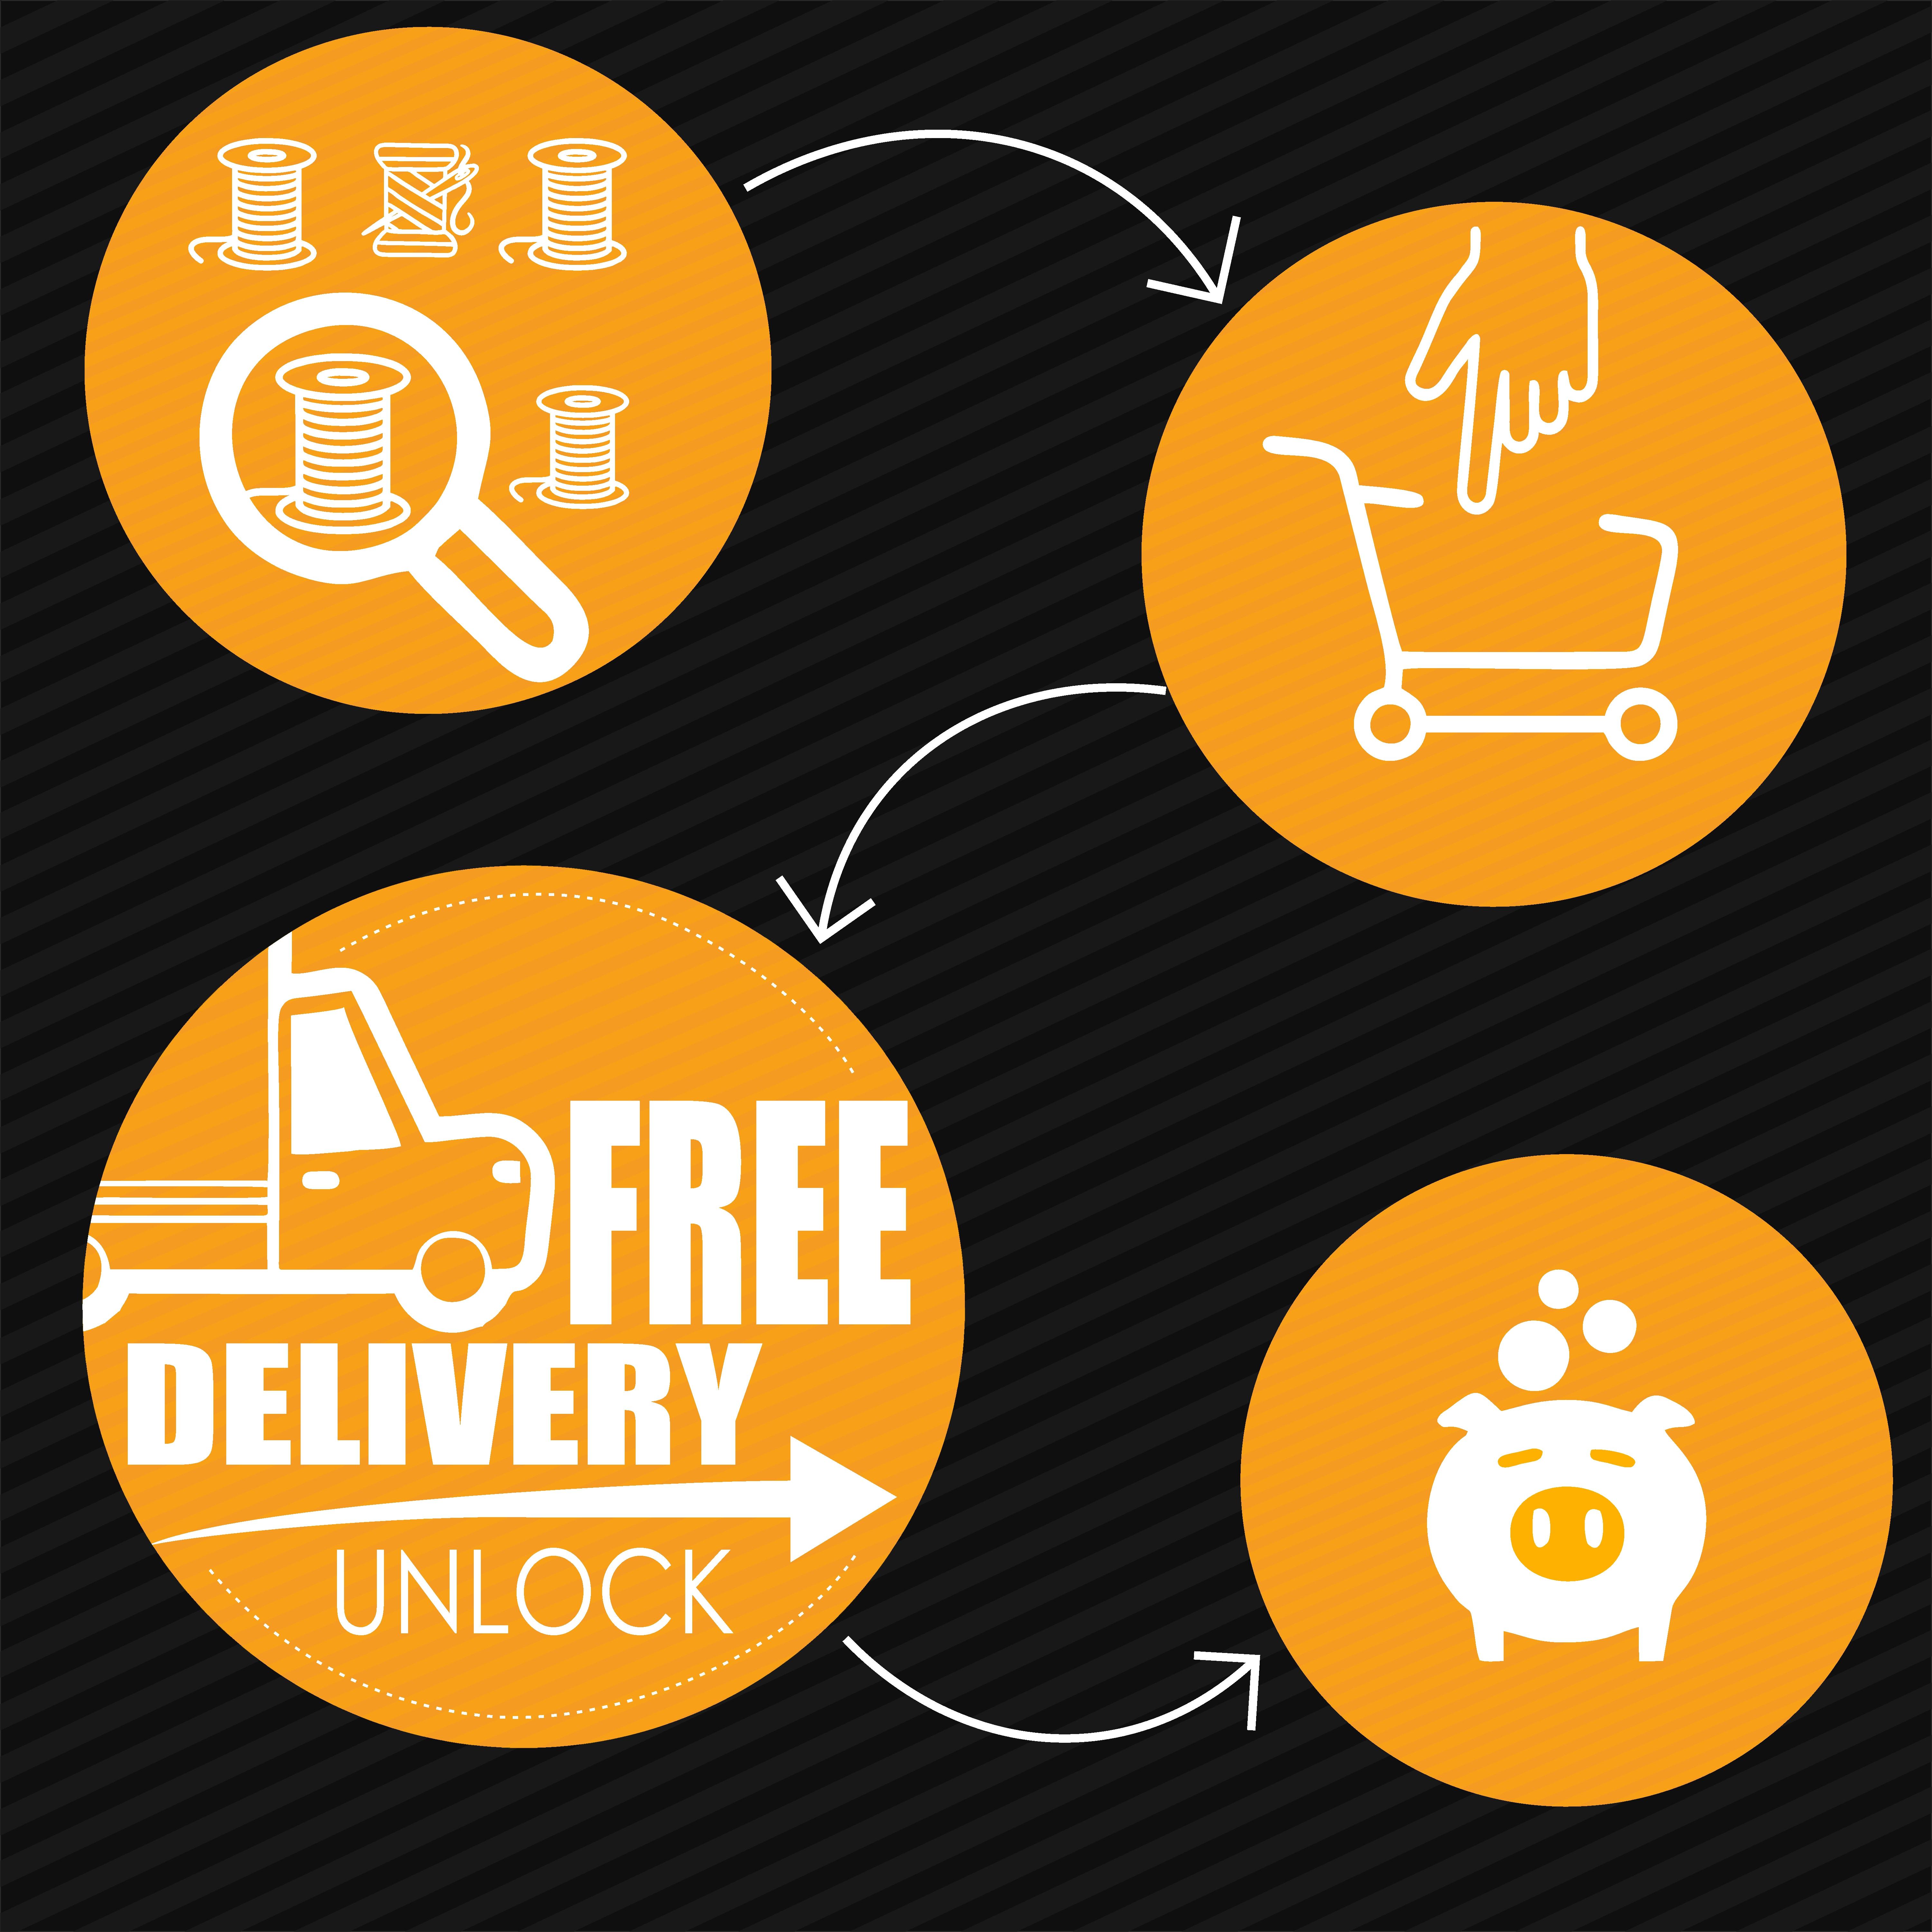 Free delivery product